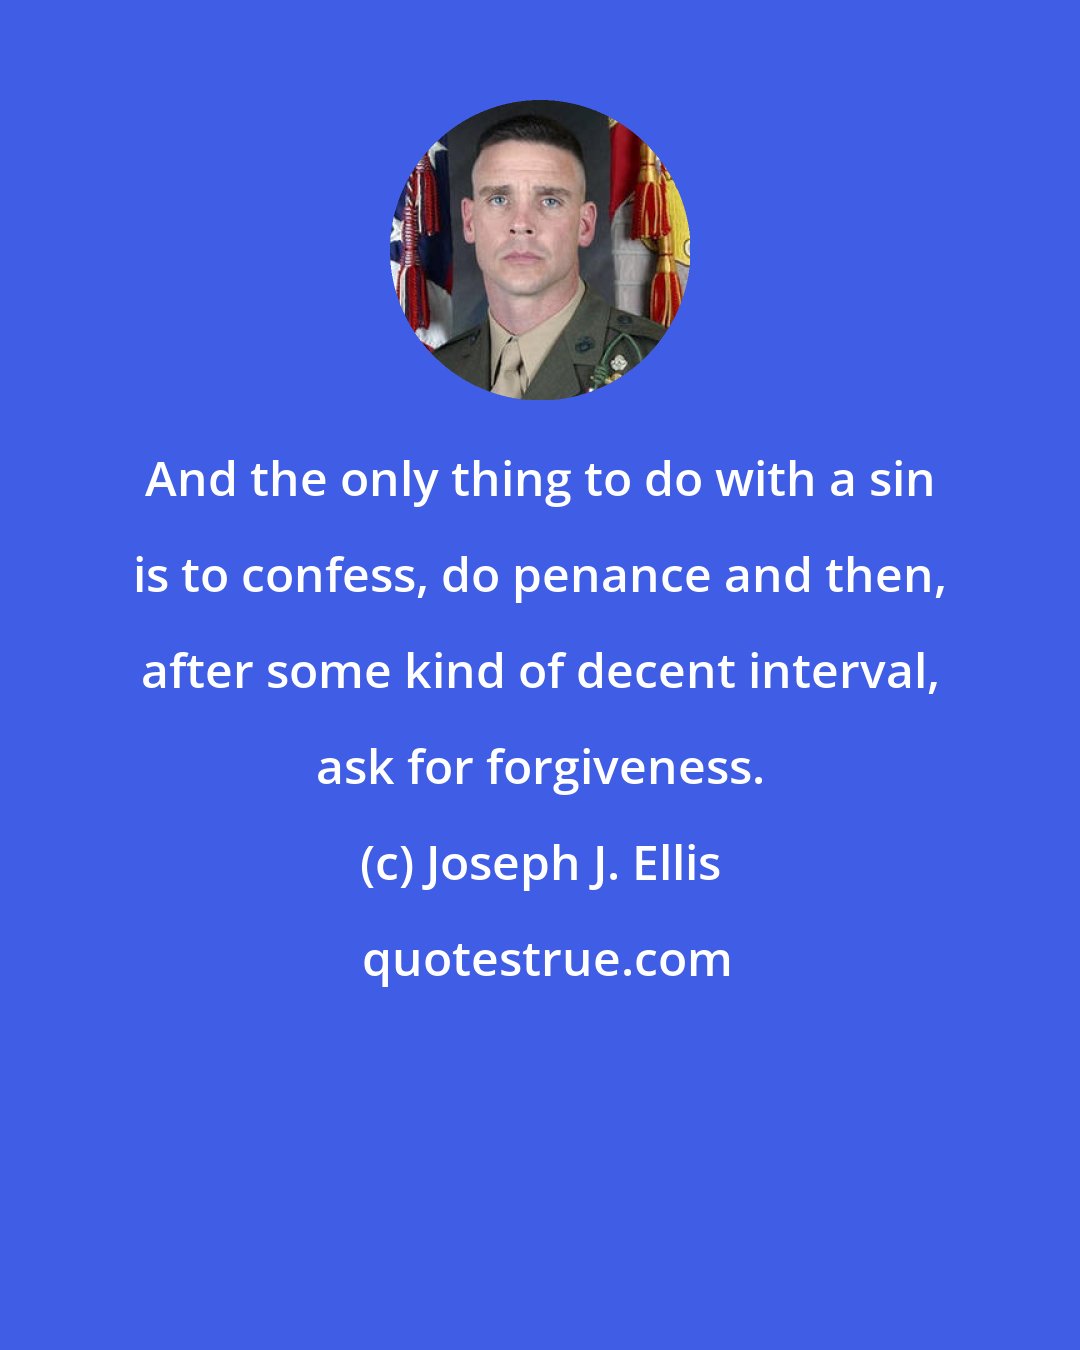 Joseph J. Ellis: And the only thing to do with a sin is to confess, do penance and then, after some kind of decent interval, ask for forgiveness.